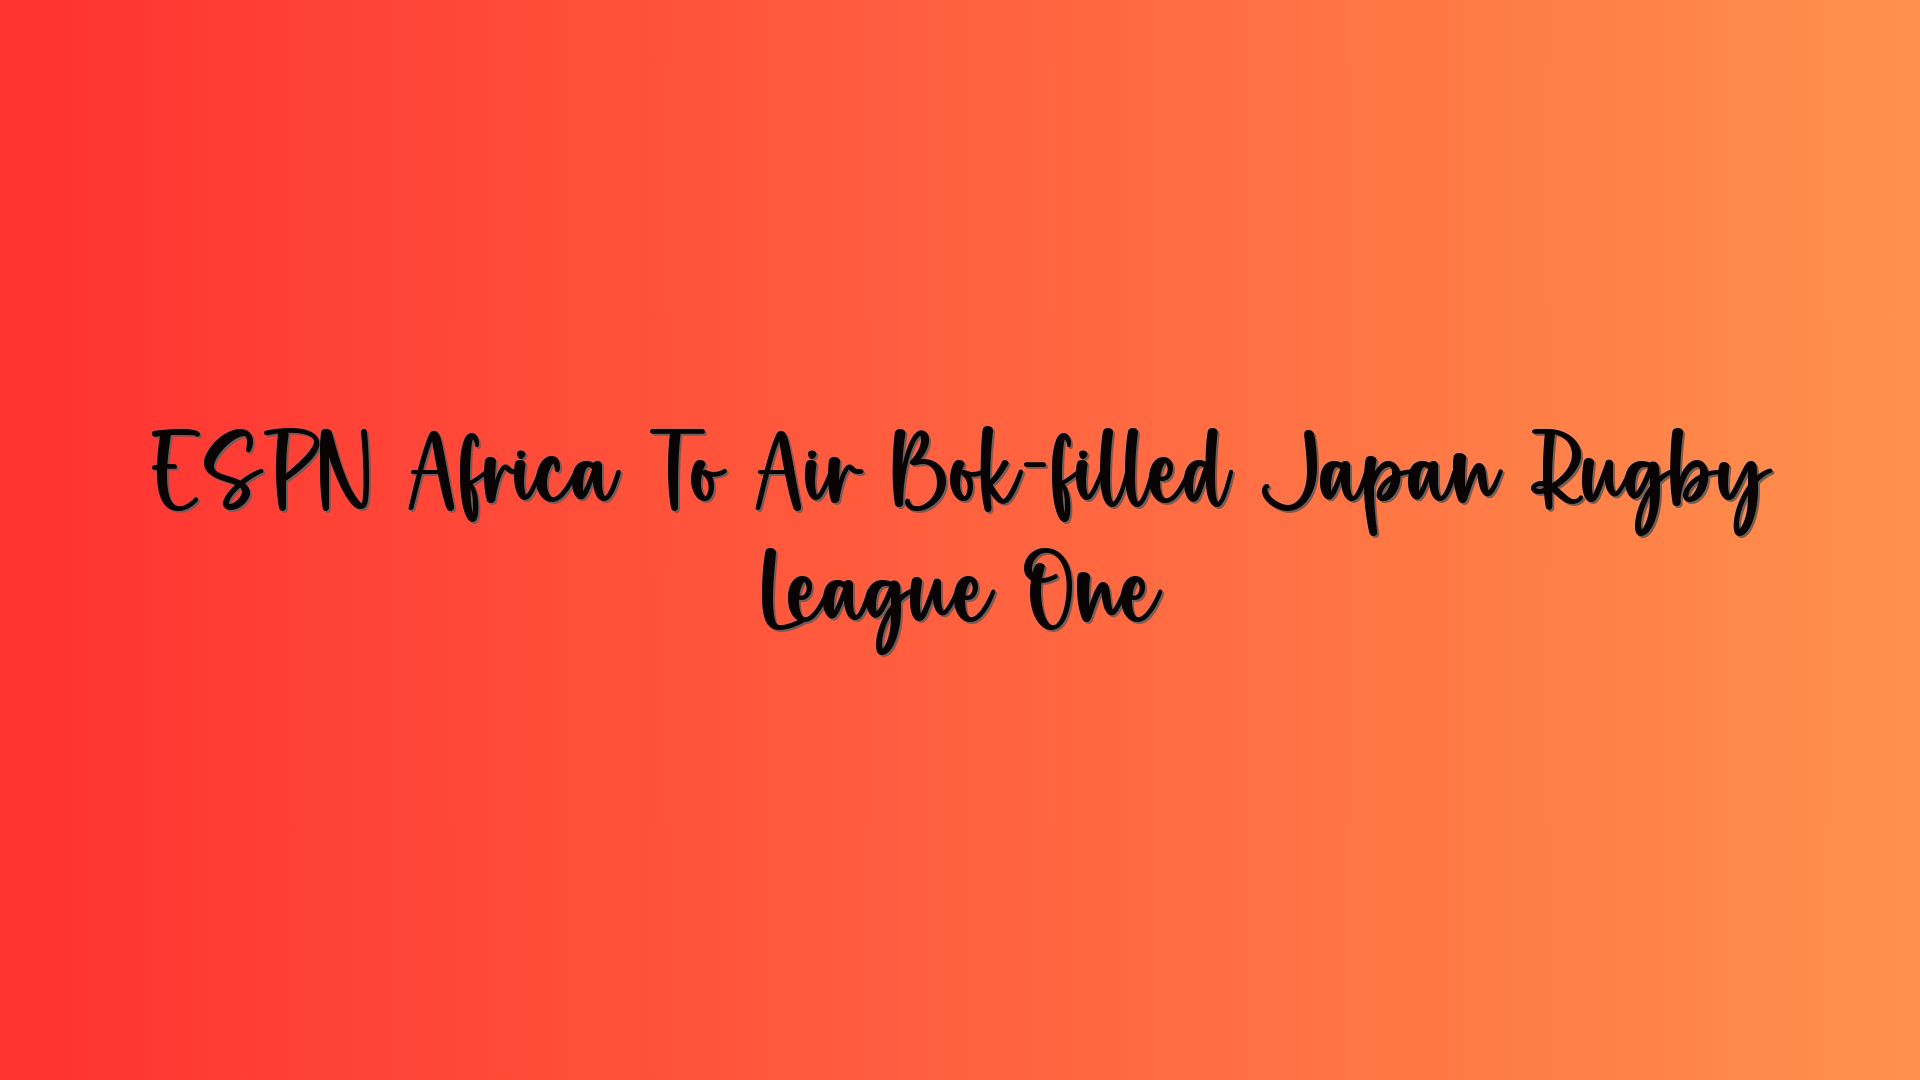 ESPN Africa To Air Bok-filled Japan Rugby League One